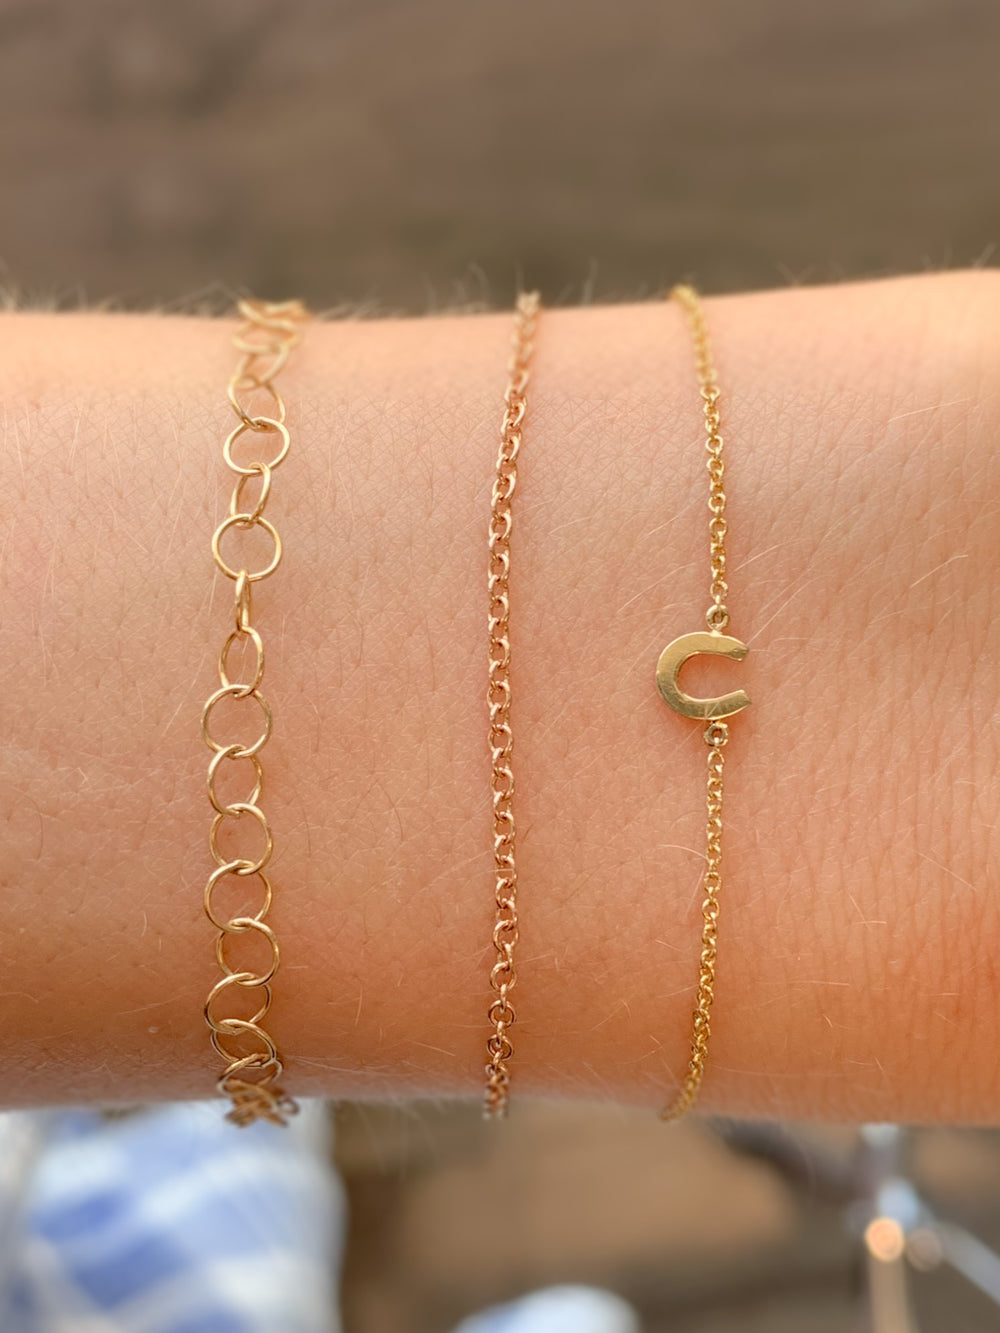 14k yellow gold bracelets with a gold horse shoe